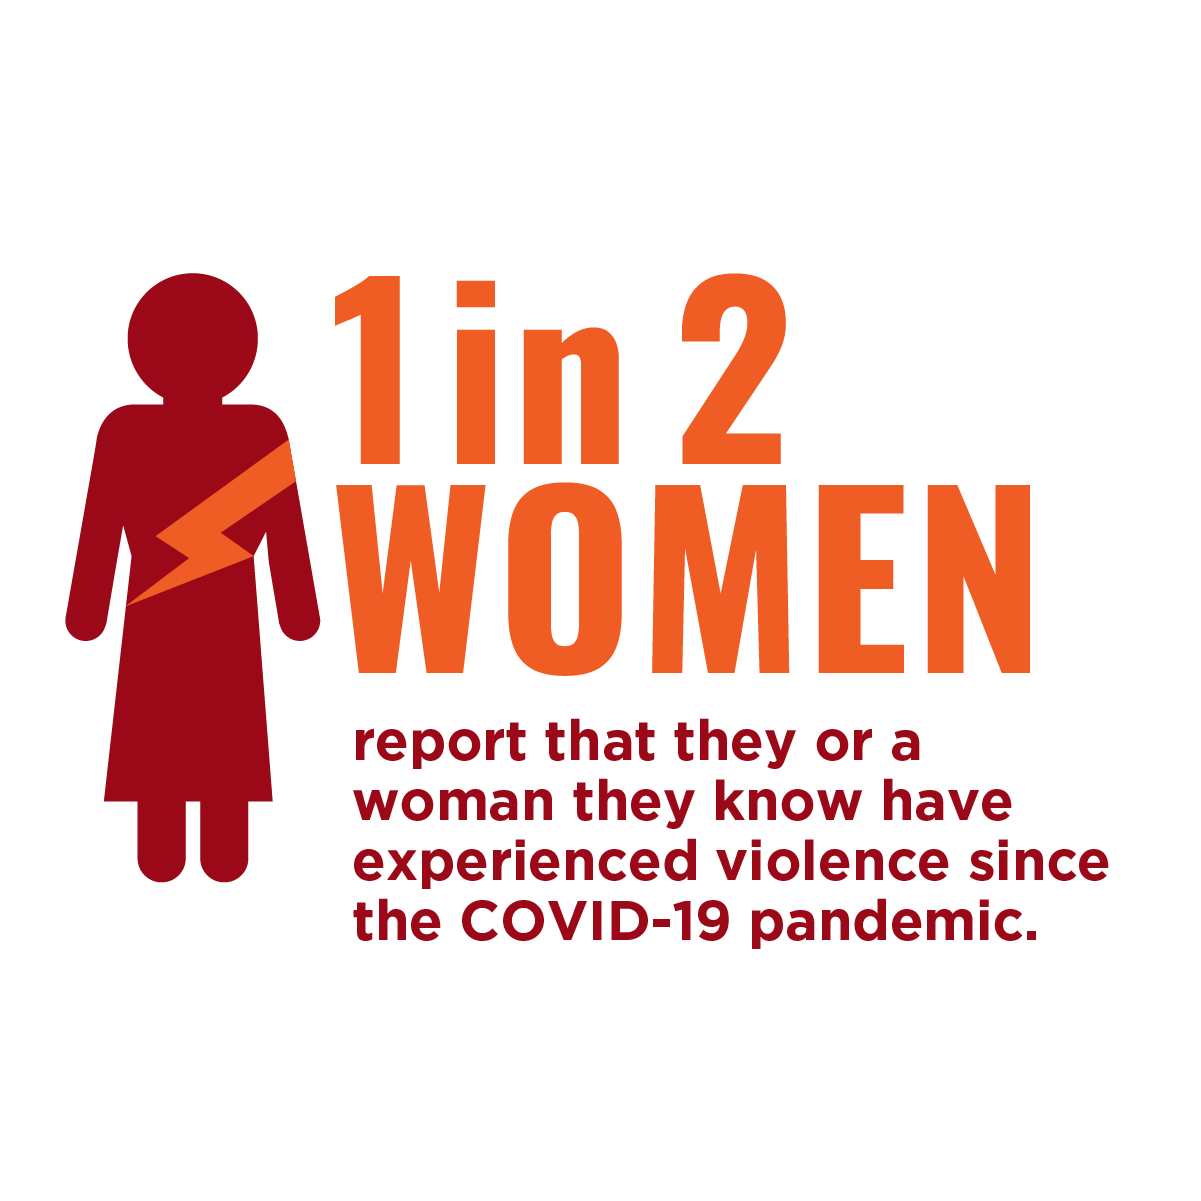 1 in 2 women reported that they or a woman they know have experienced violence since COVID-19